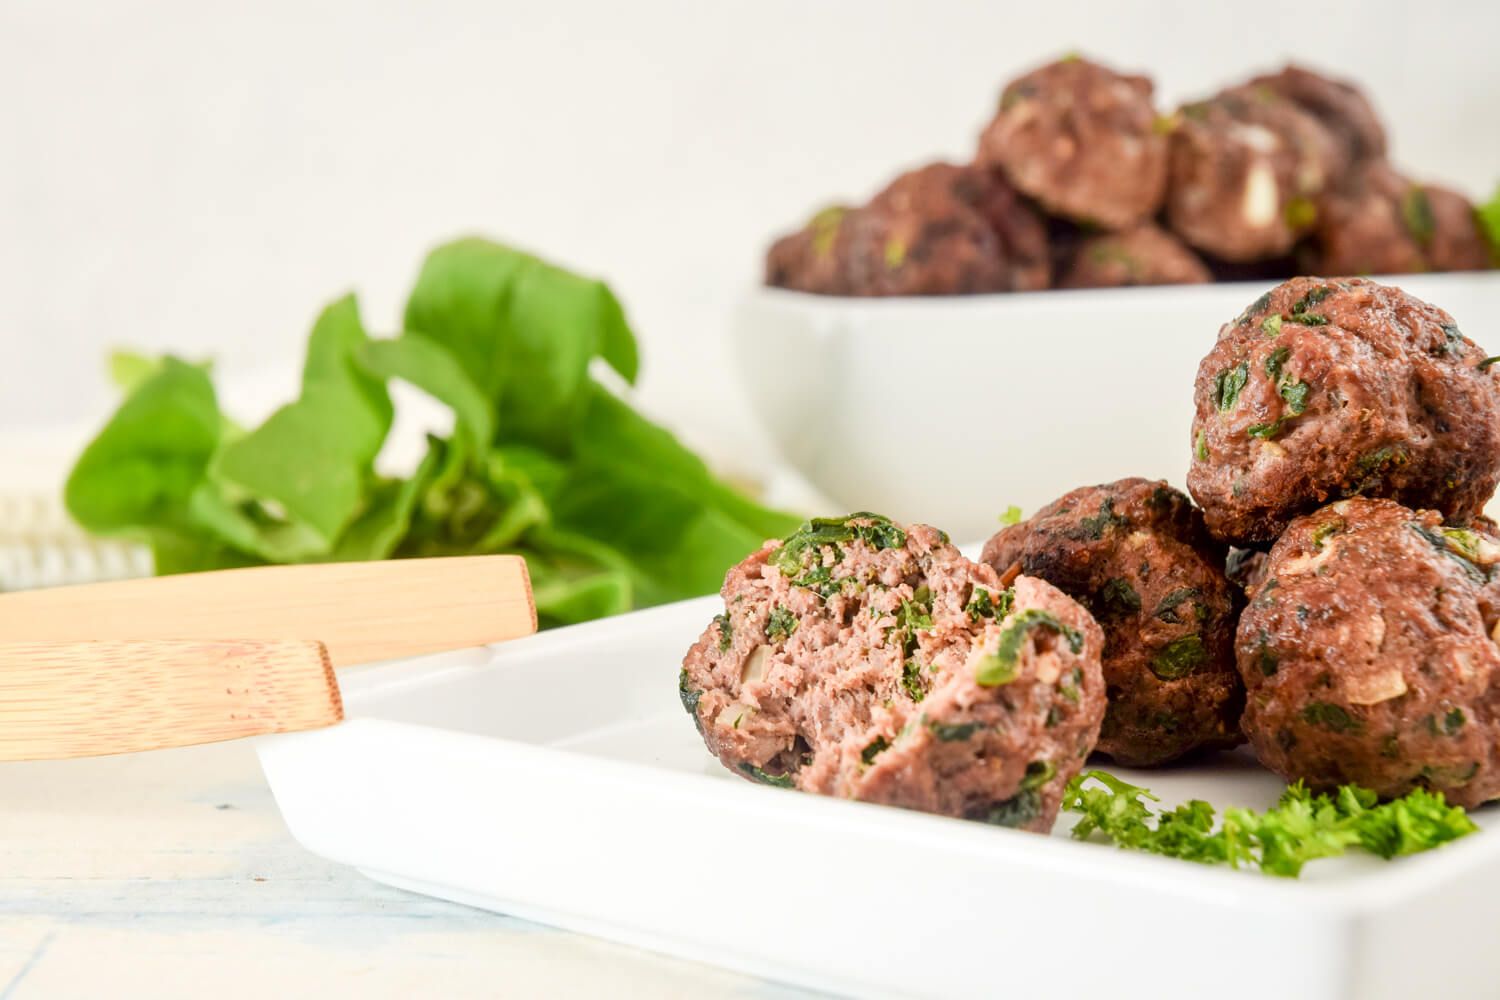 Spinach meatballs with lean beef and chopped spinach on a plate with tongs.